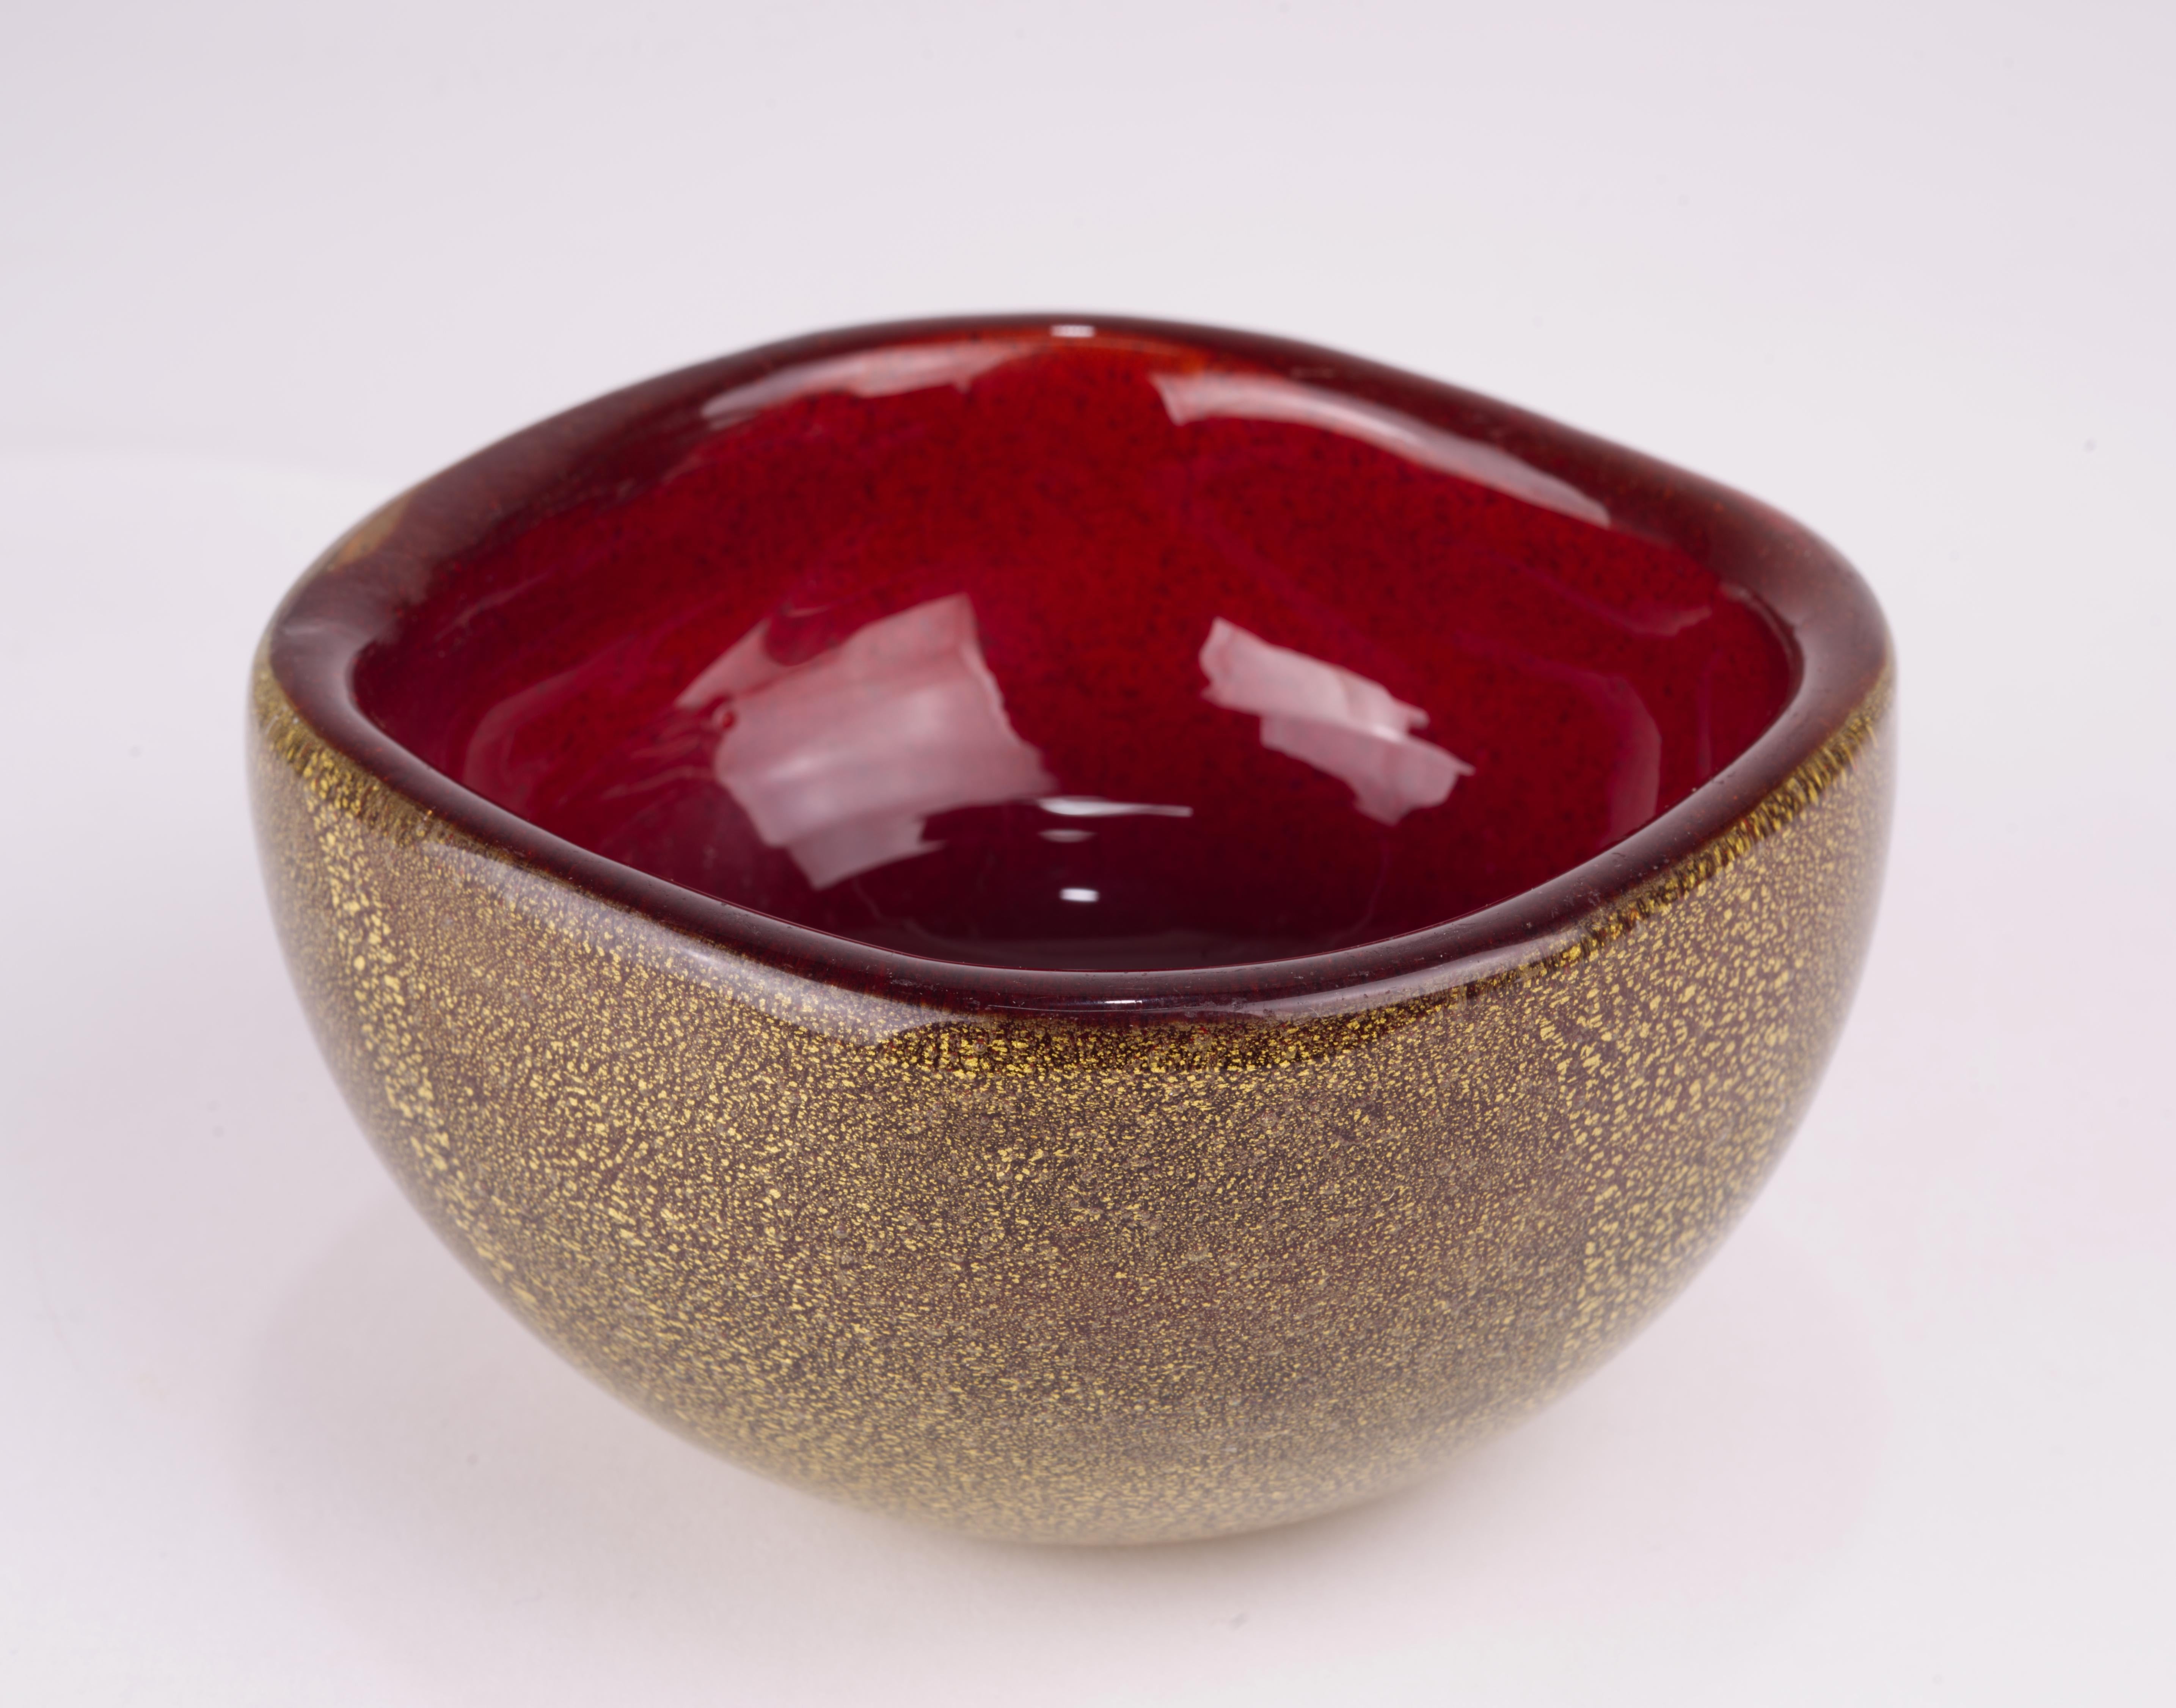  Magnificent 1950s Archimede Seguso Murano hand blown glass bowl was made in a stunning combination of deep red glass with gold leaf inclusions encased in clear glass overlay, using  polveri and sommerso techniques.

The bowl is unmarked, but the